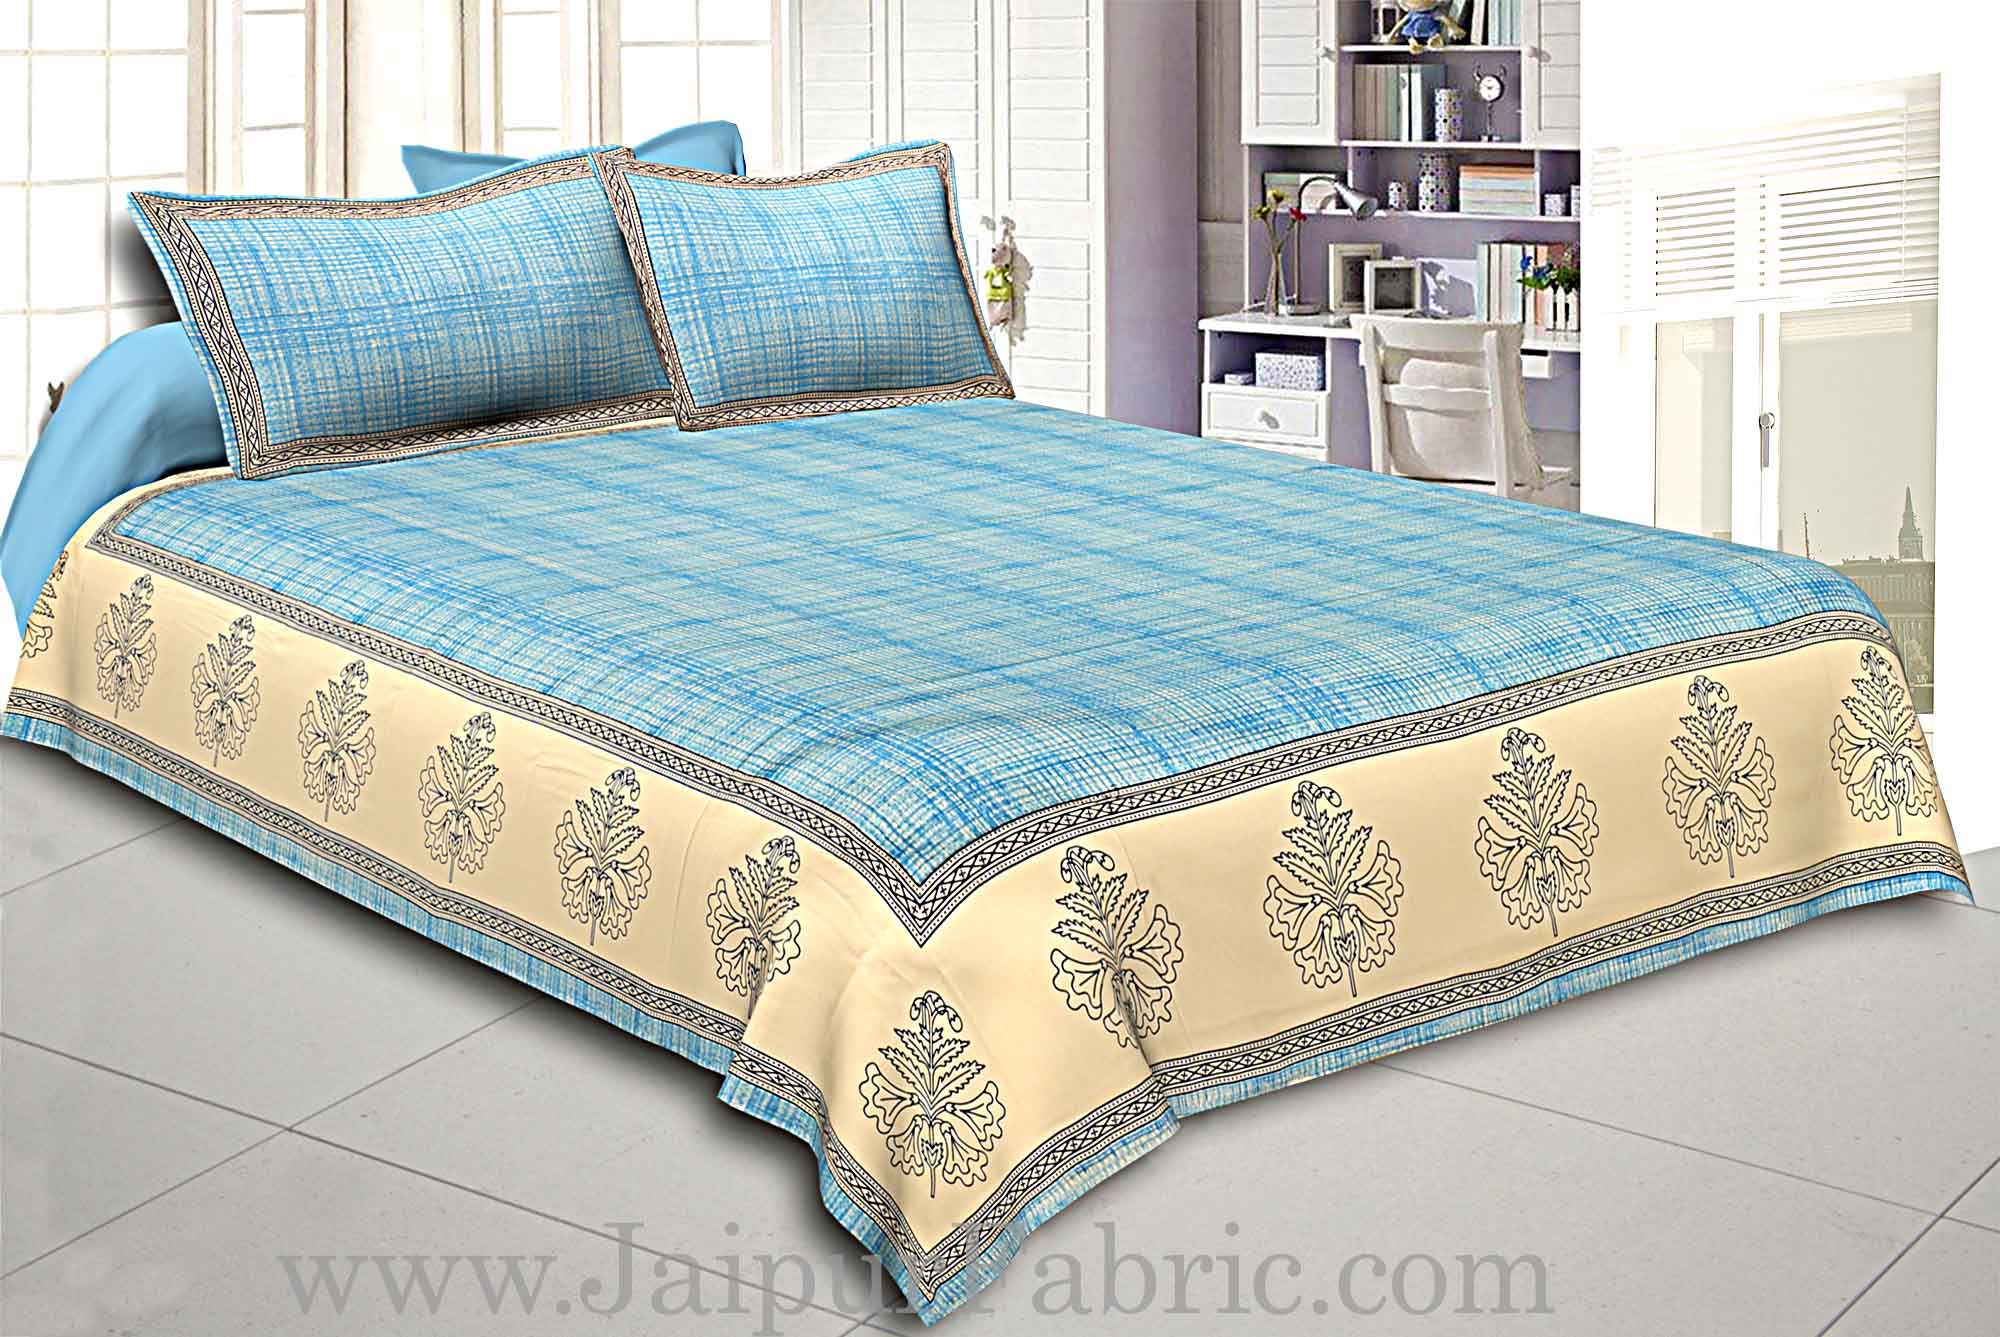 King Size Bedsheet  Cotton Satin Sky Blue Border With Cream And Blue  Base Hand Block  Pattern